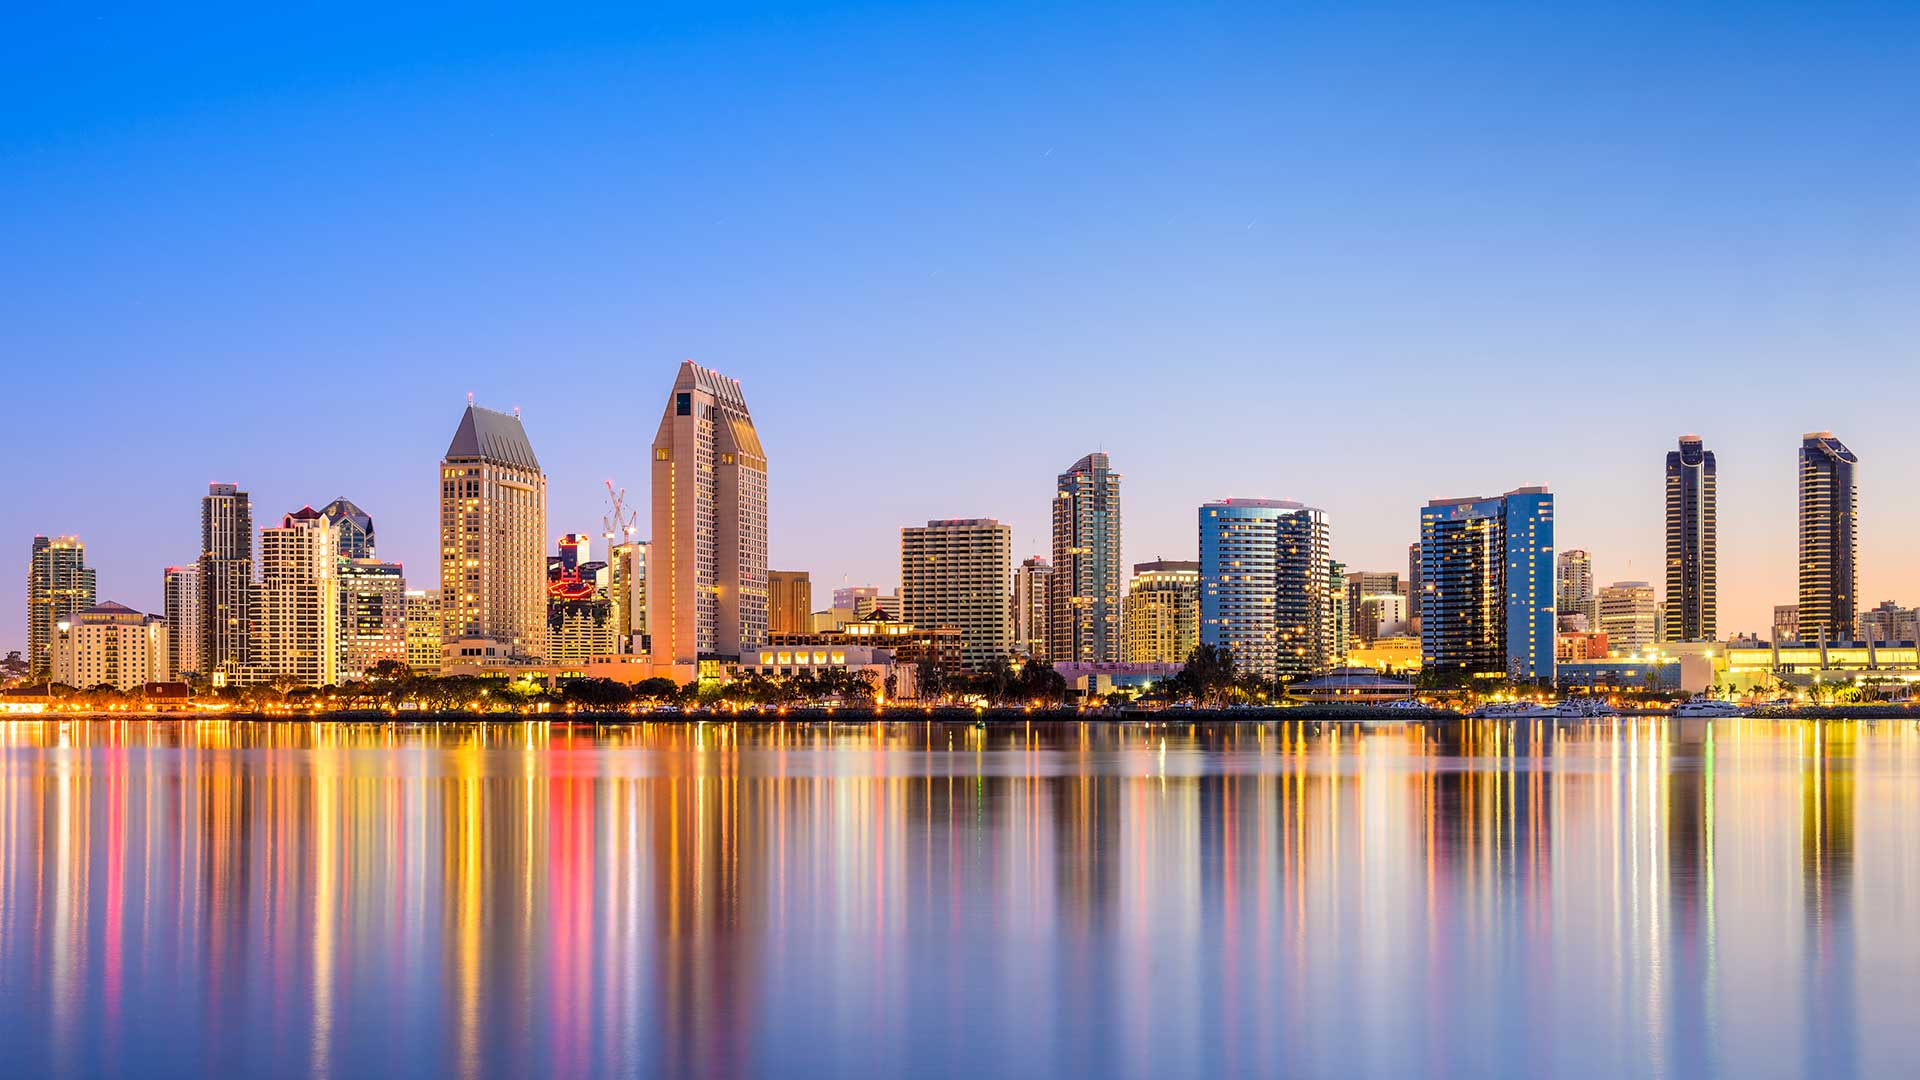 Panorama to illustrate dating in san diego